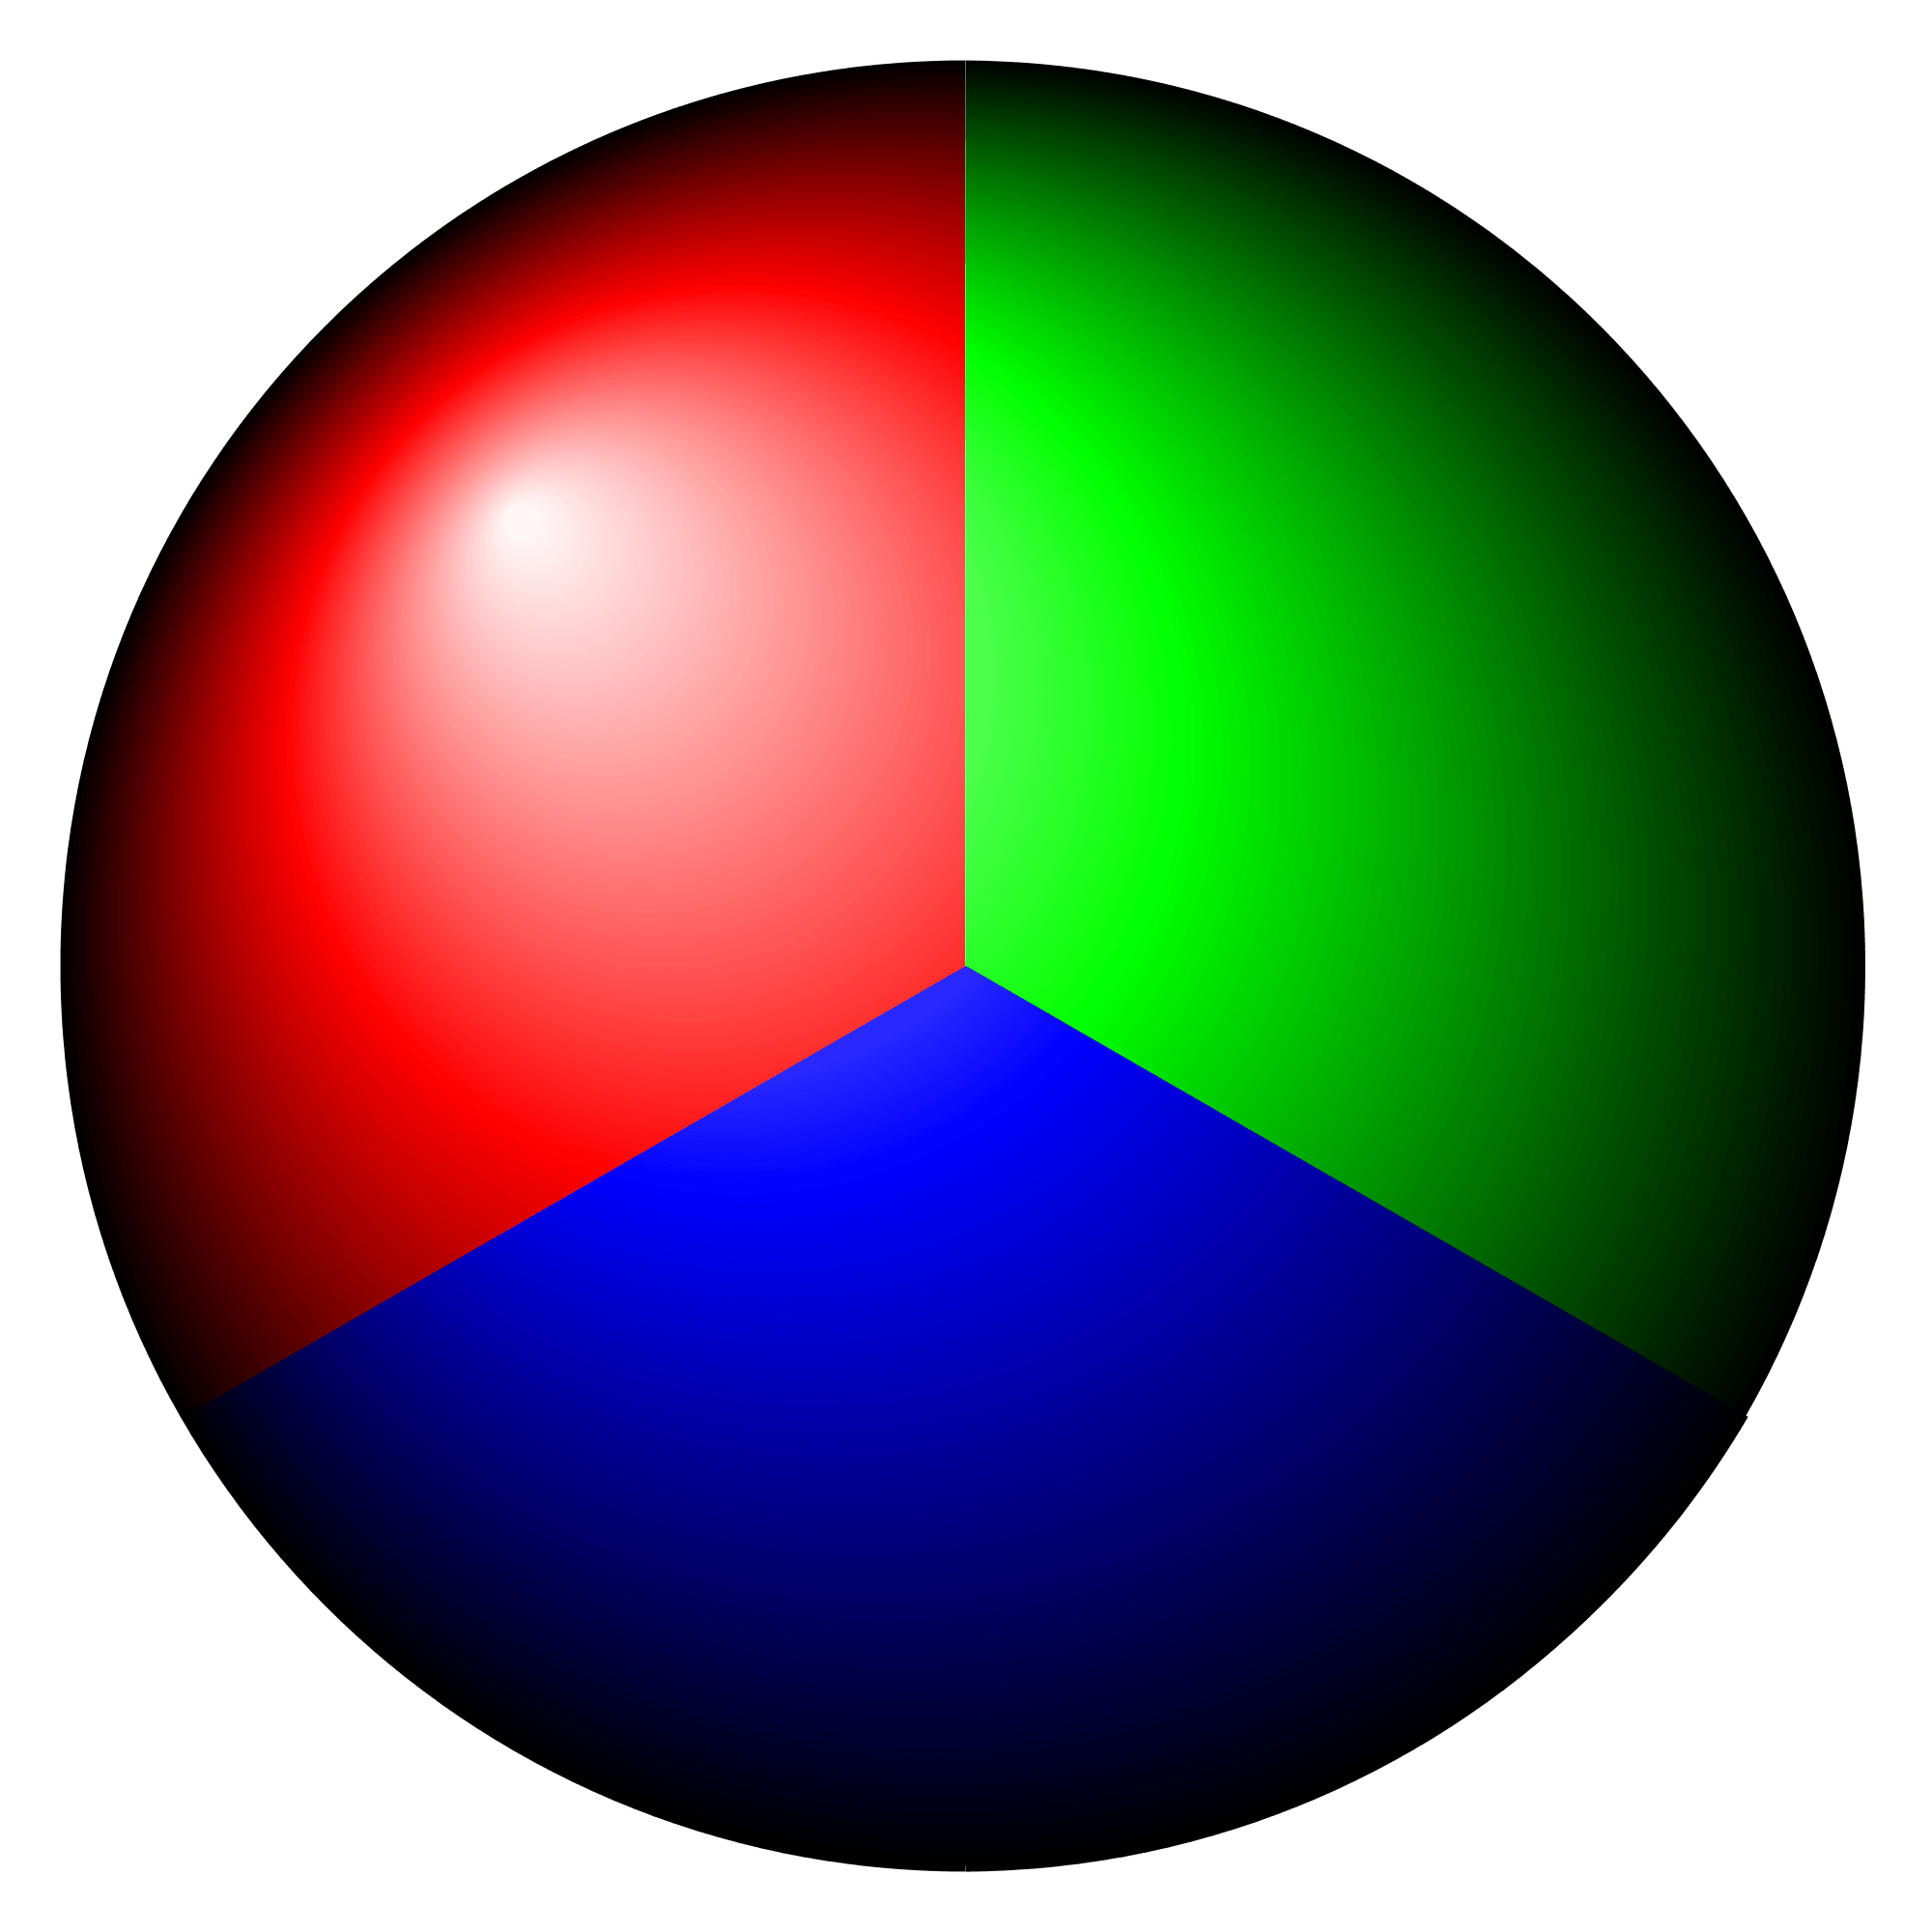 Red and Blue Dot Logo - File:Red-green-blue dot.svg - Wikimedia Commons